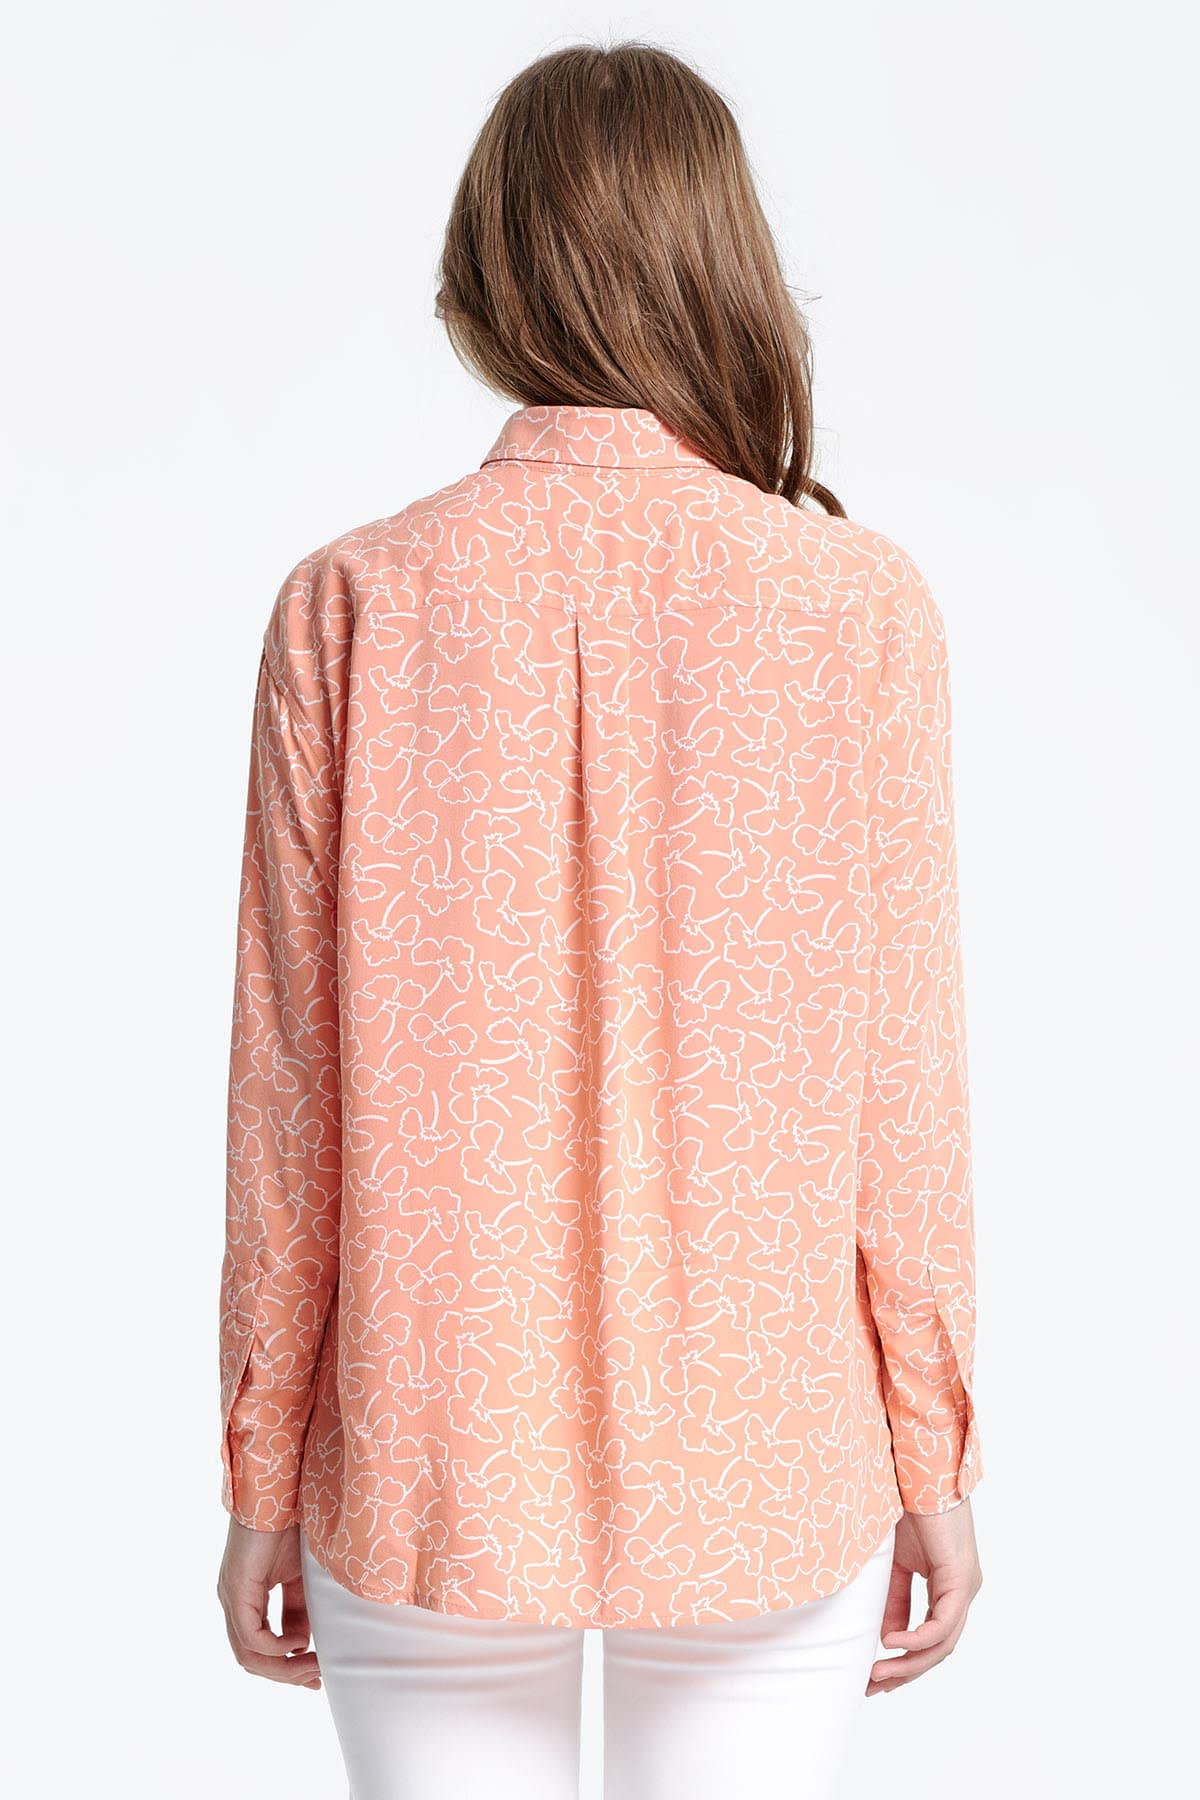 Swing peach-colored shirt with white flowers , photo 4